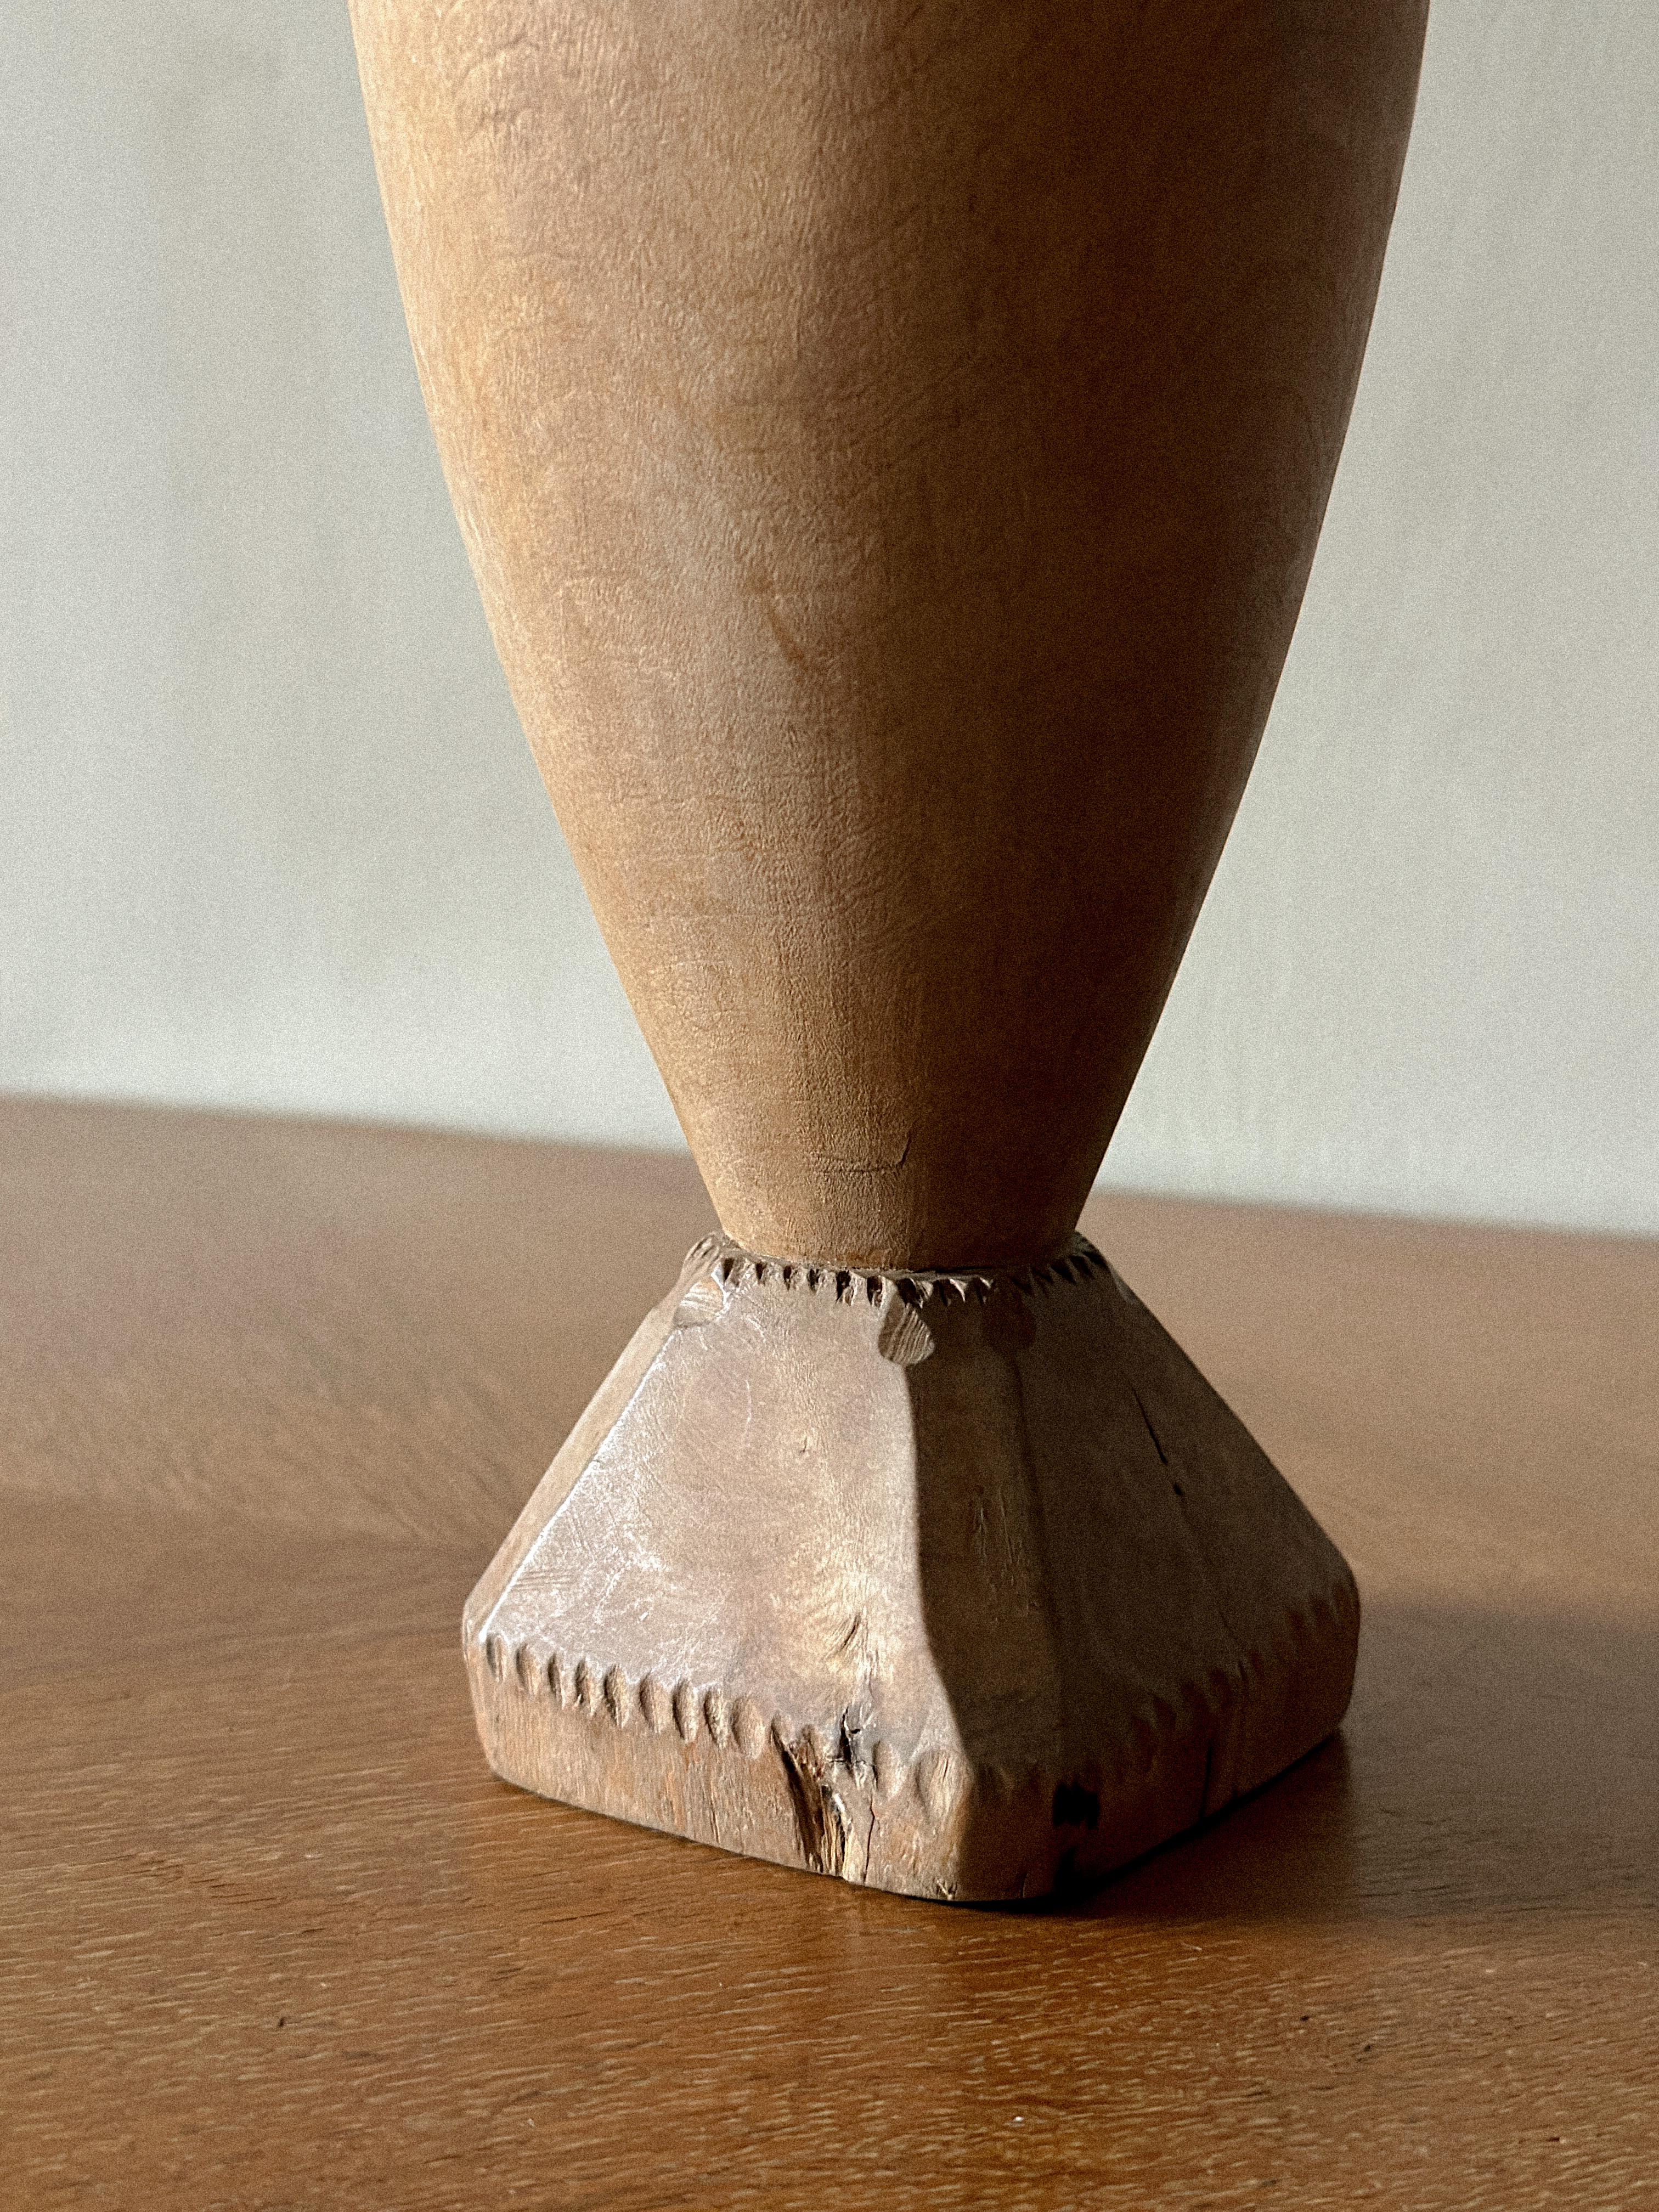 A Primitive Wooden Antique Mortar, Scandinavia 1800s In Good Condition For Sale In Hønefoss, 30